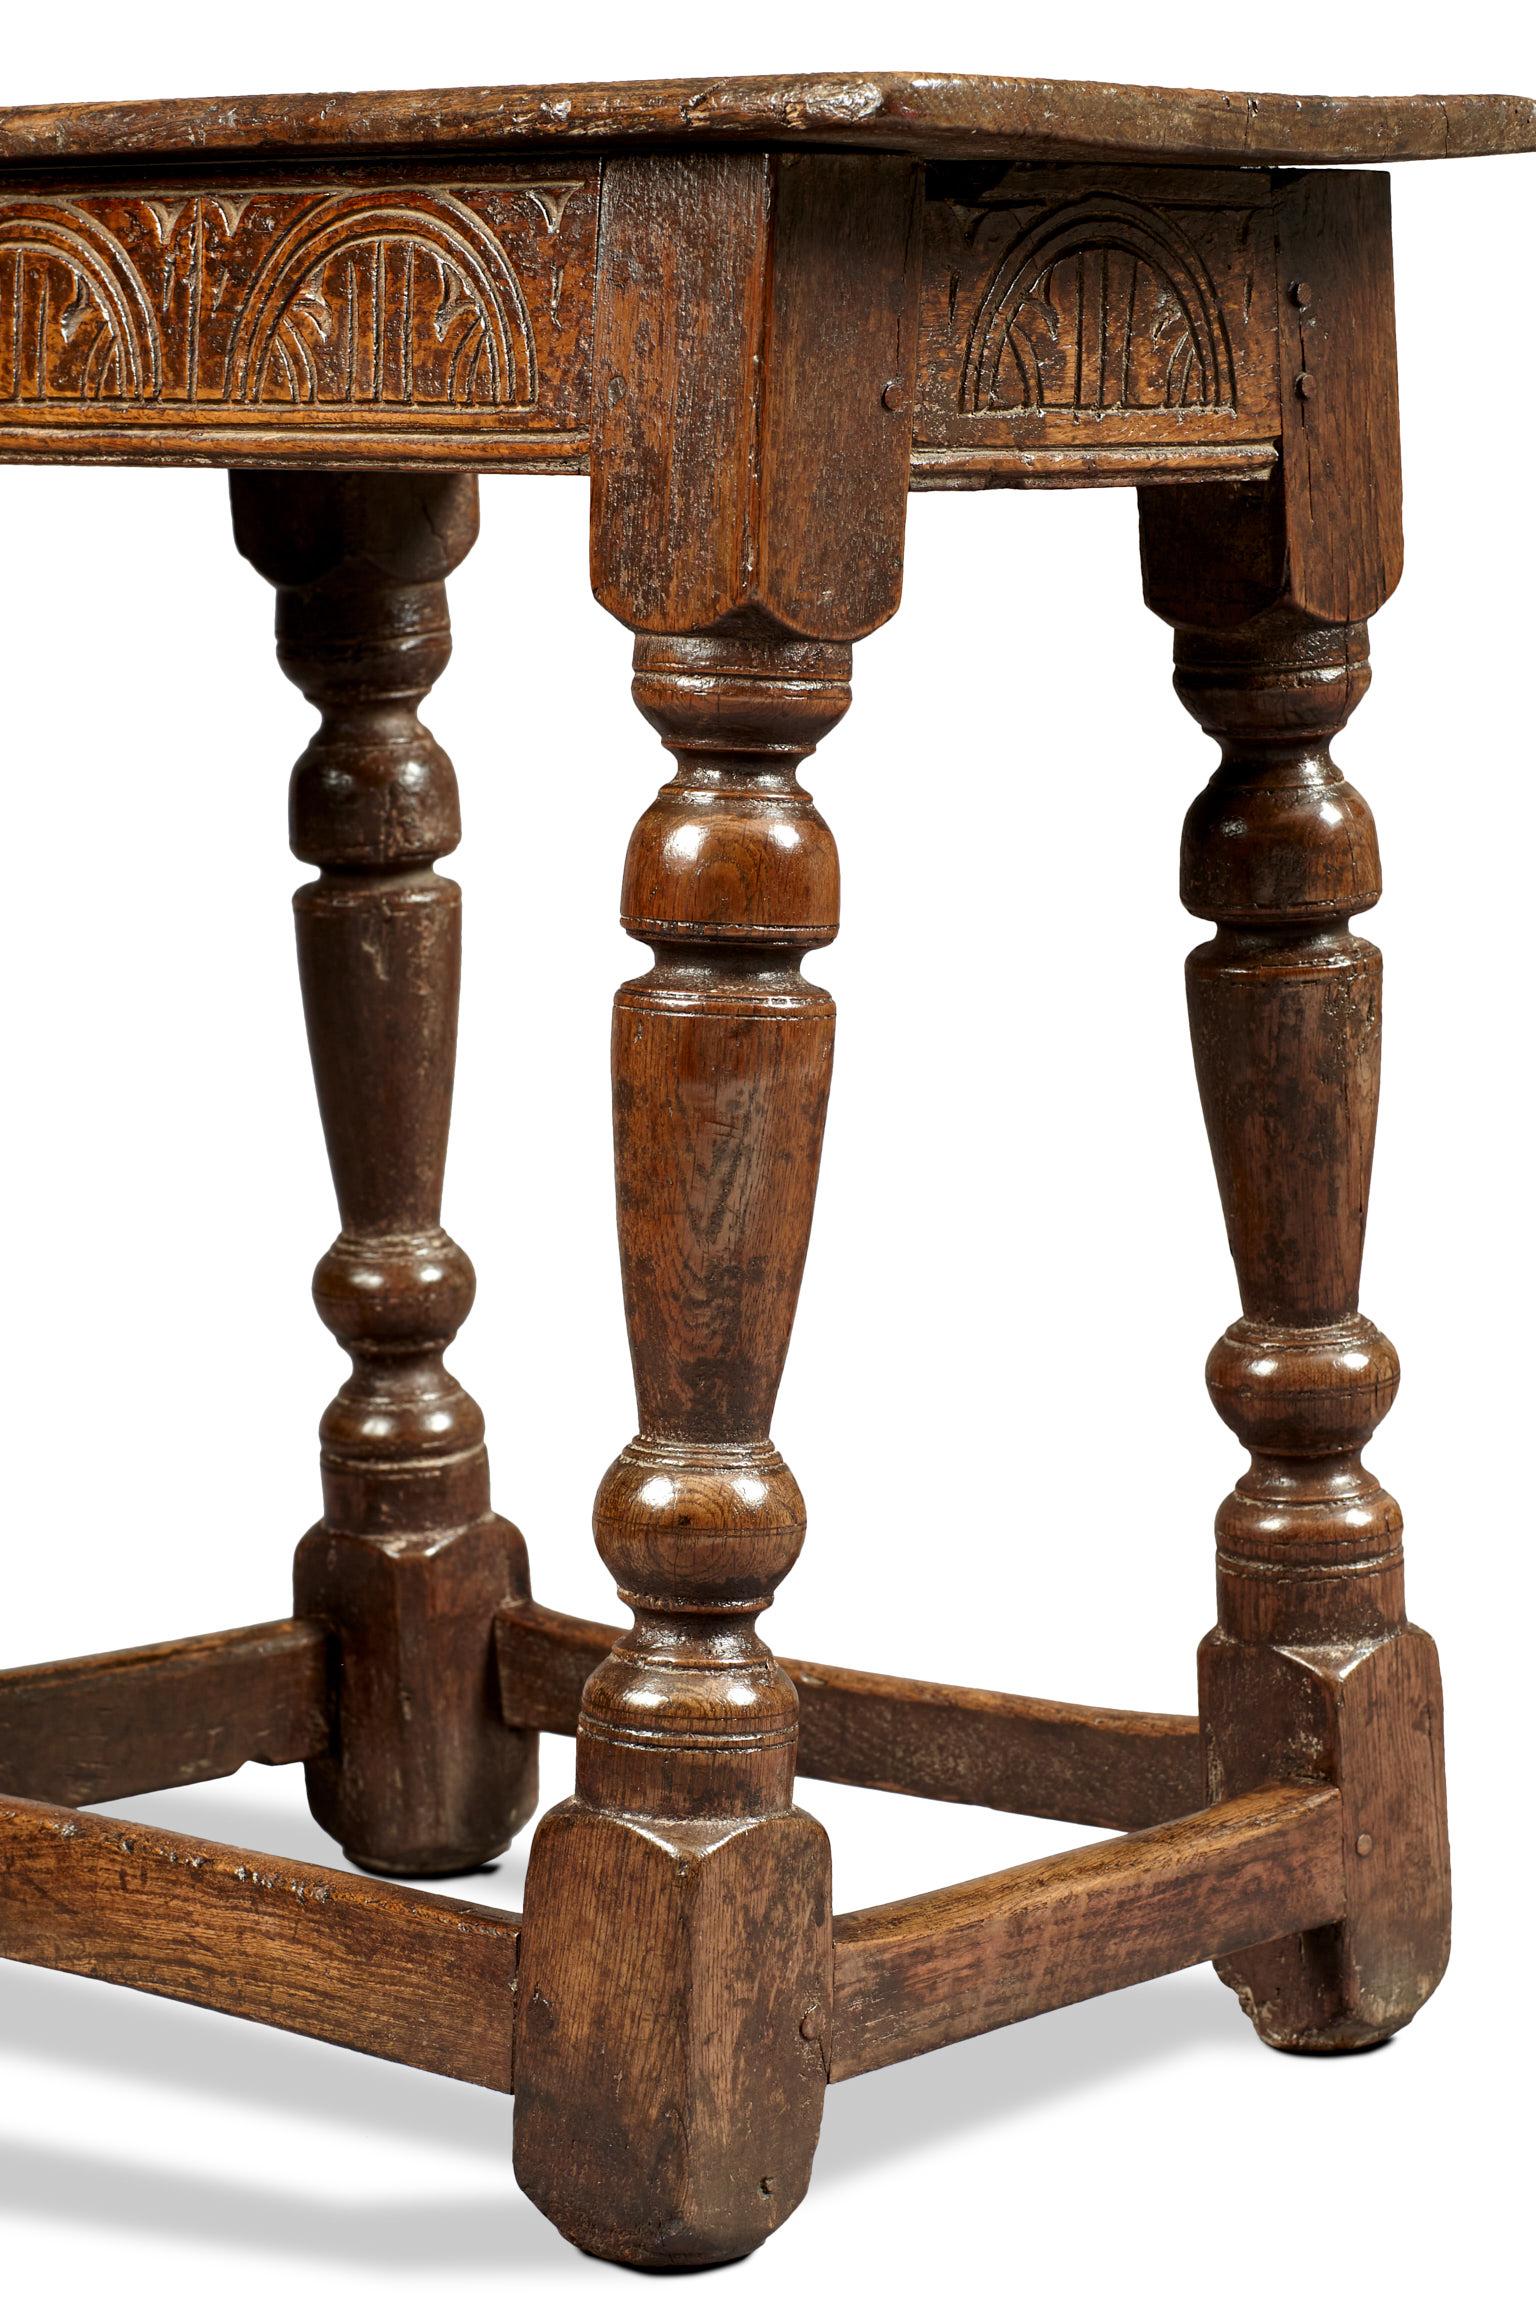 Two Charles I Oak Joined Stools, English, Gloucestershire, circa 1630-1640 In Good Condition For Sale In Matlock, Derbyshire